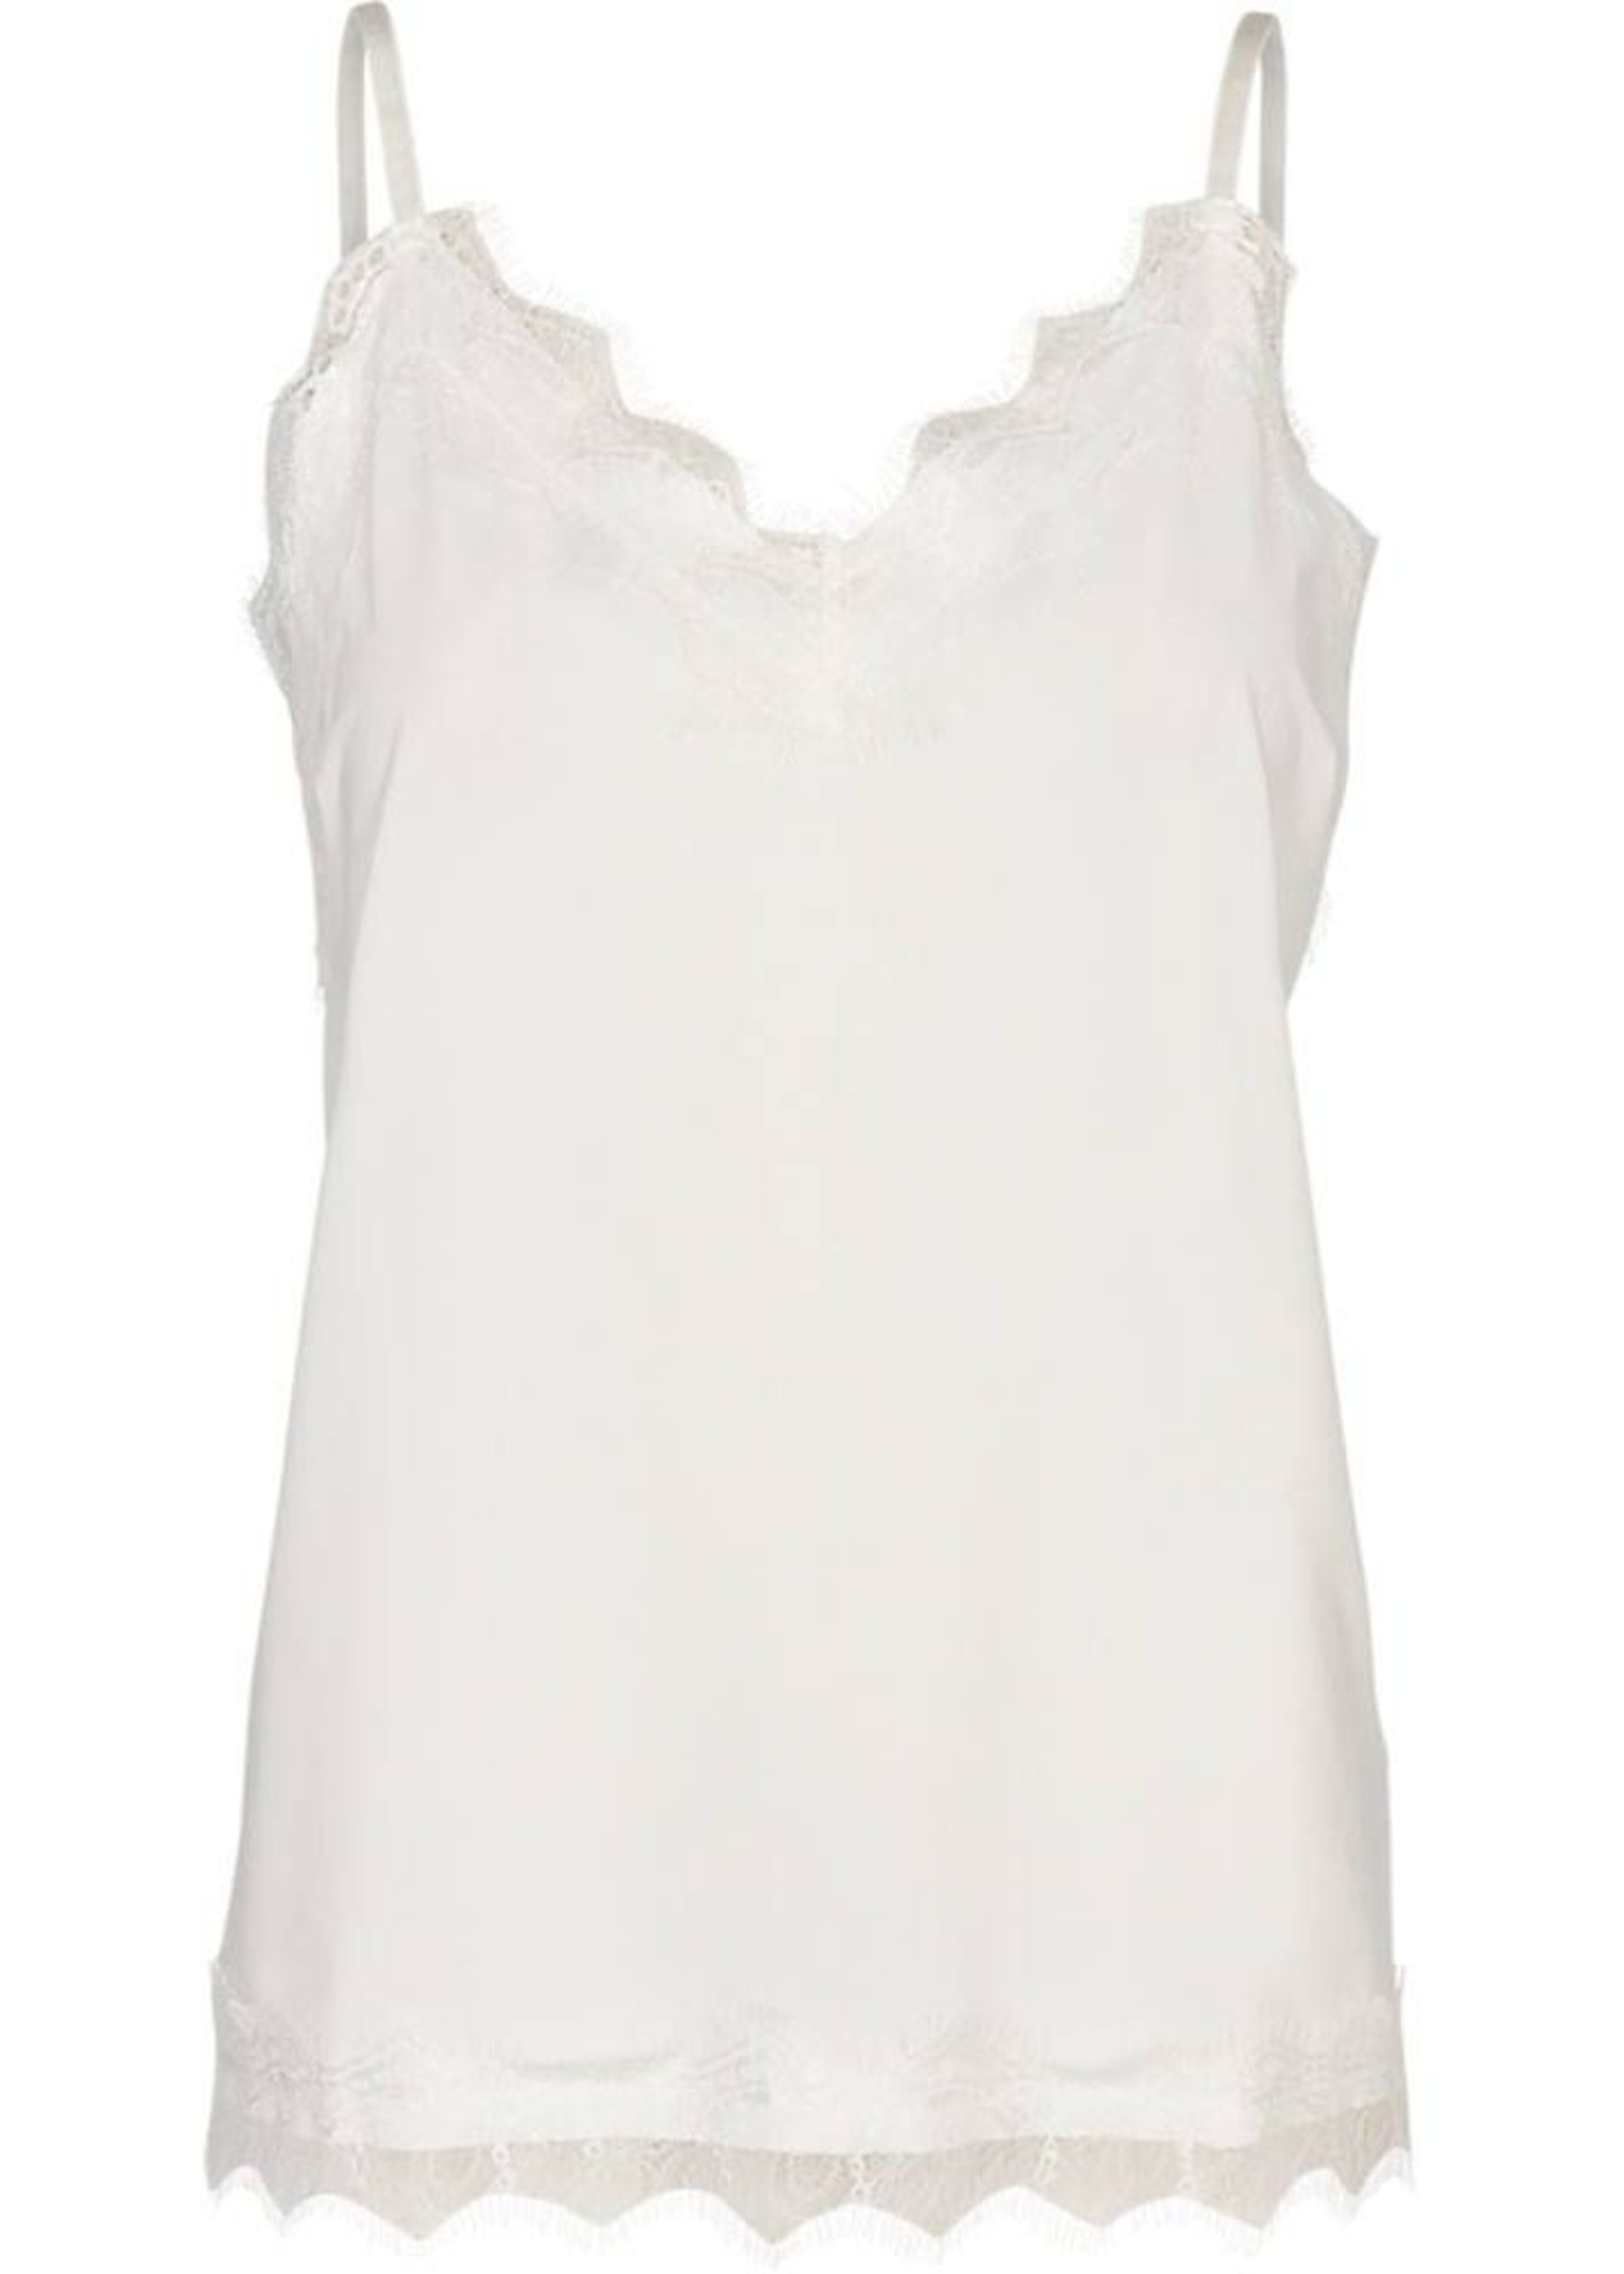 FREE/QUENT Fqbicco-st - Sleeveless tops 